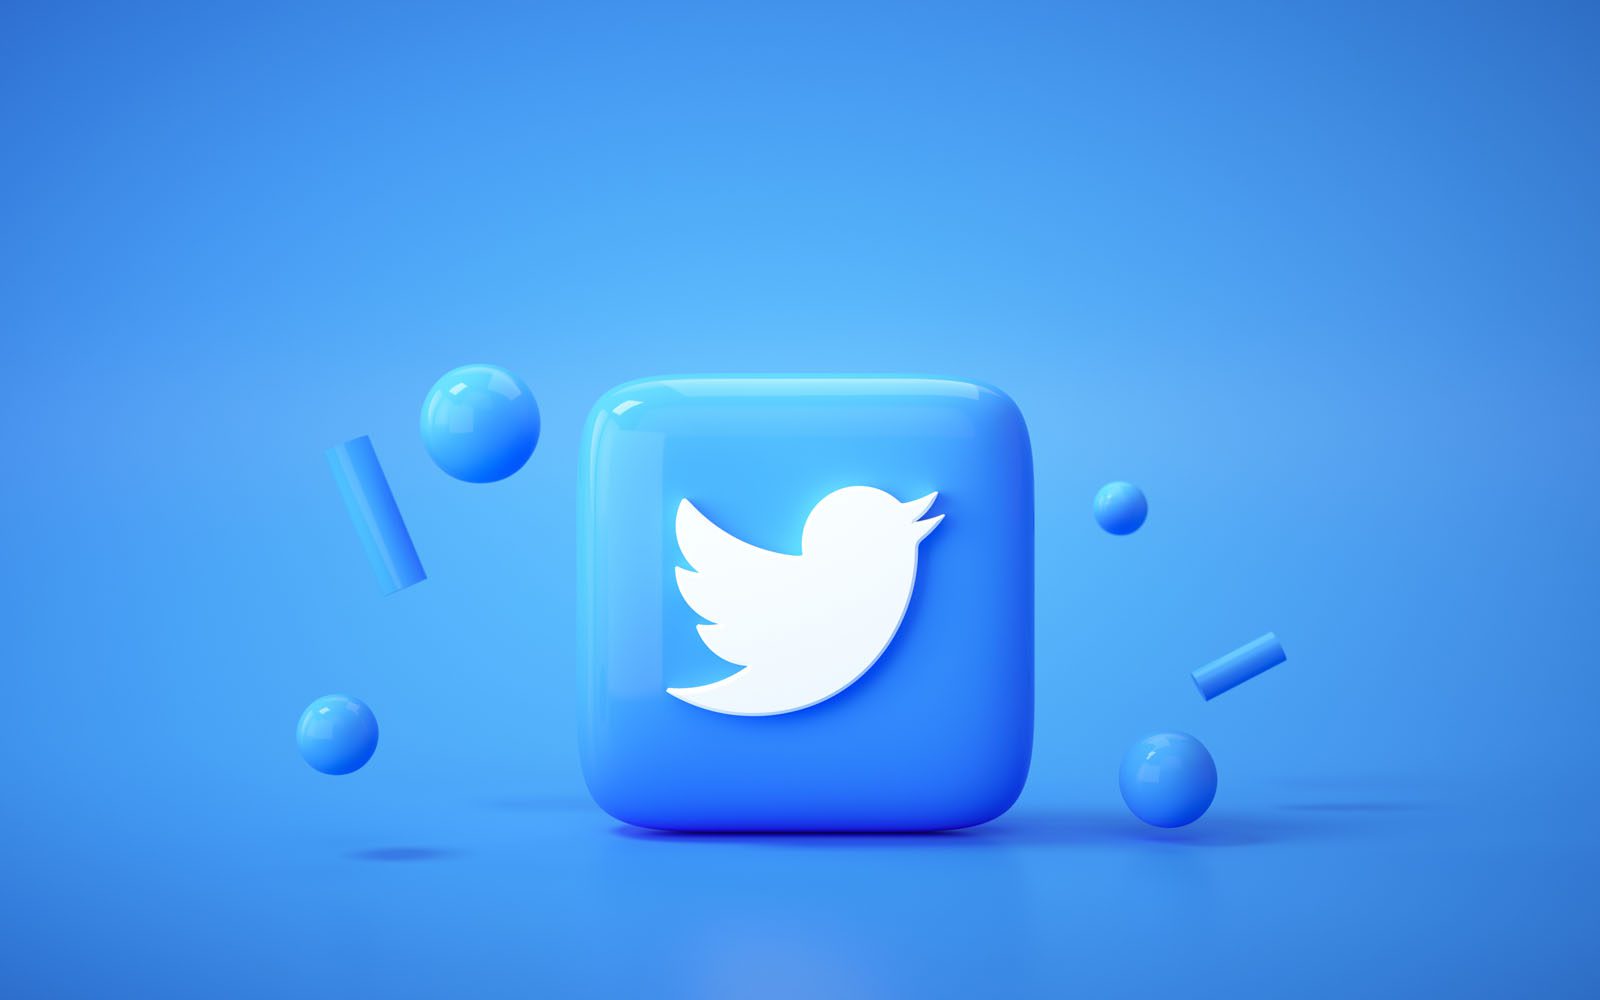 Twitter Study Part 2 – Continuing the Conversation